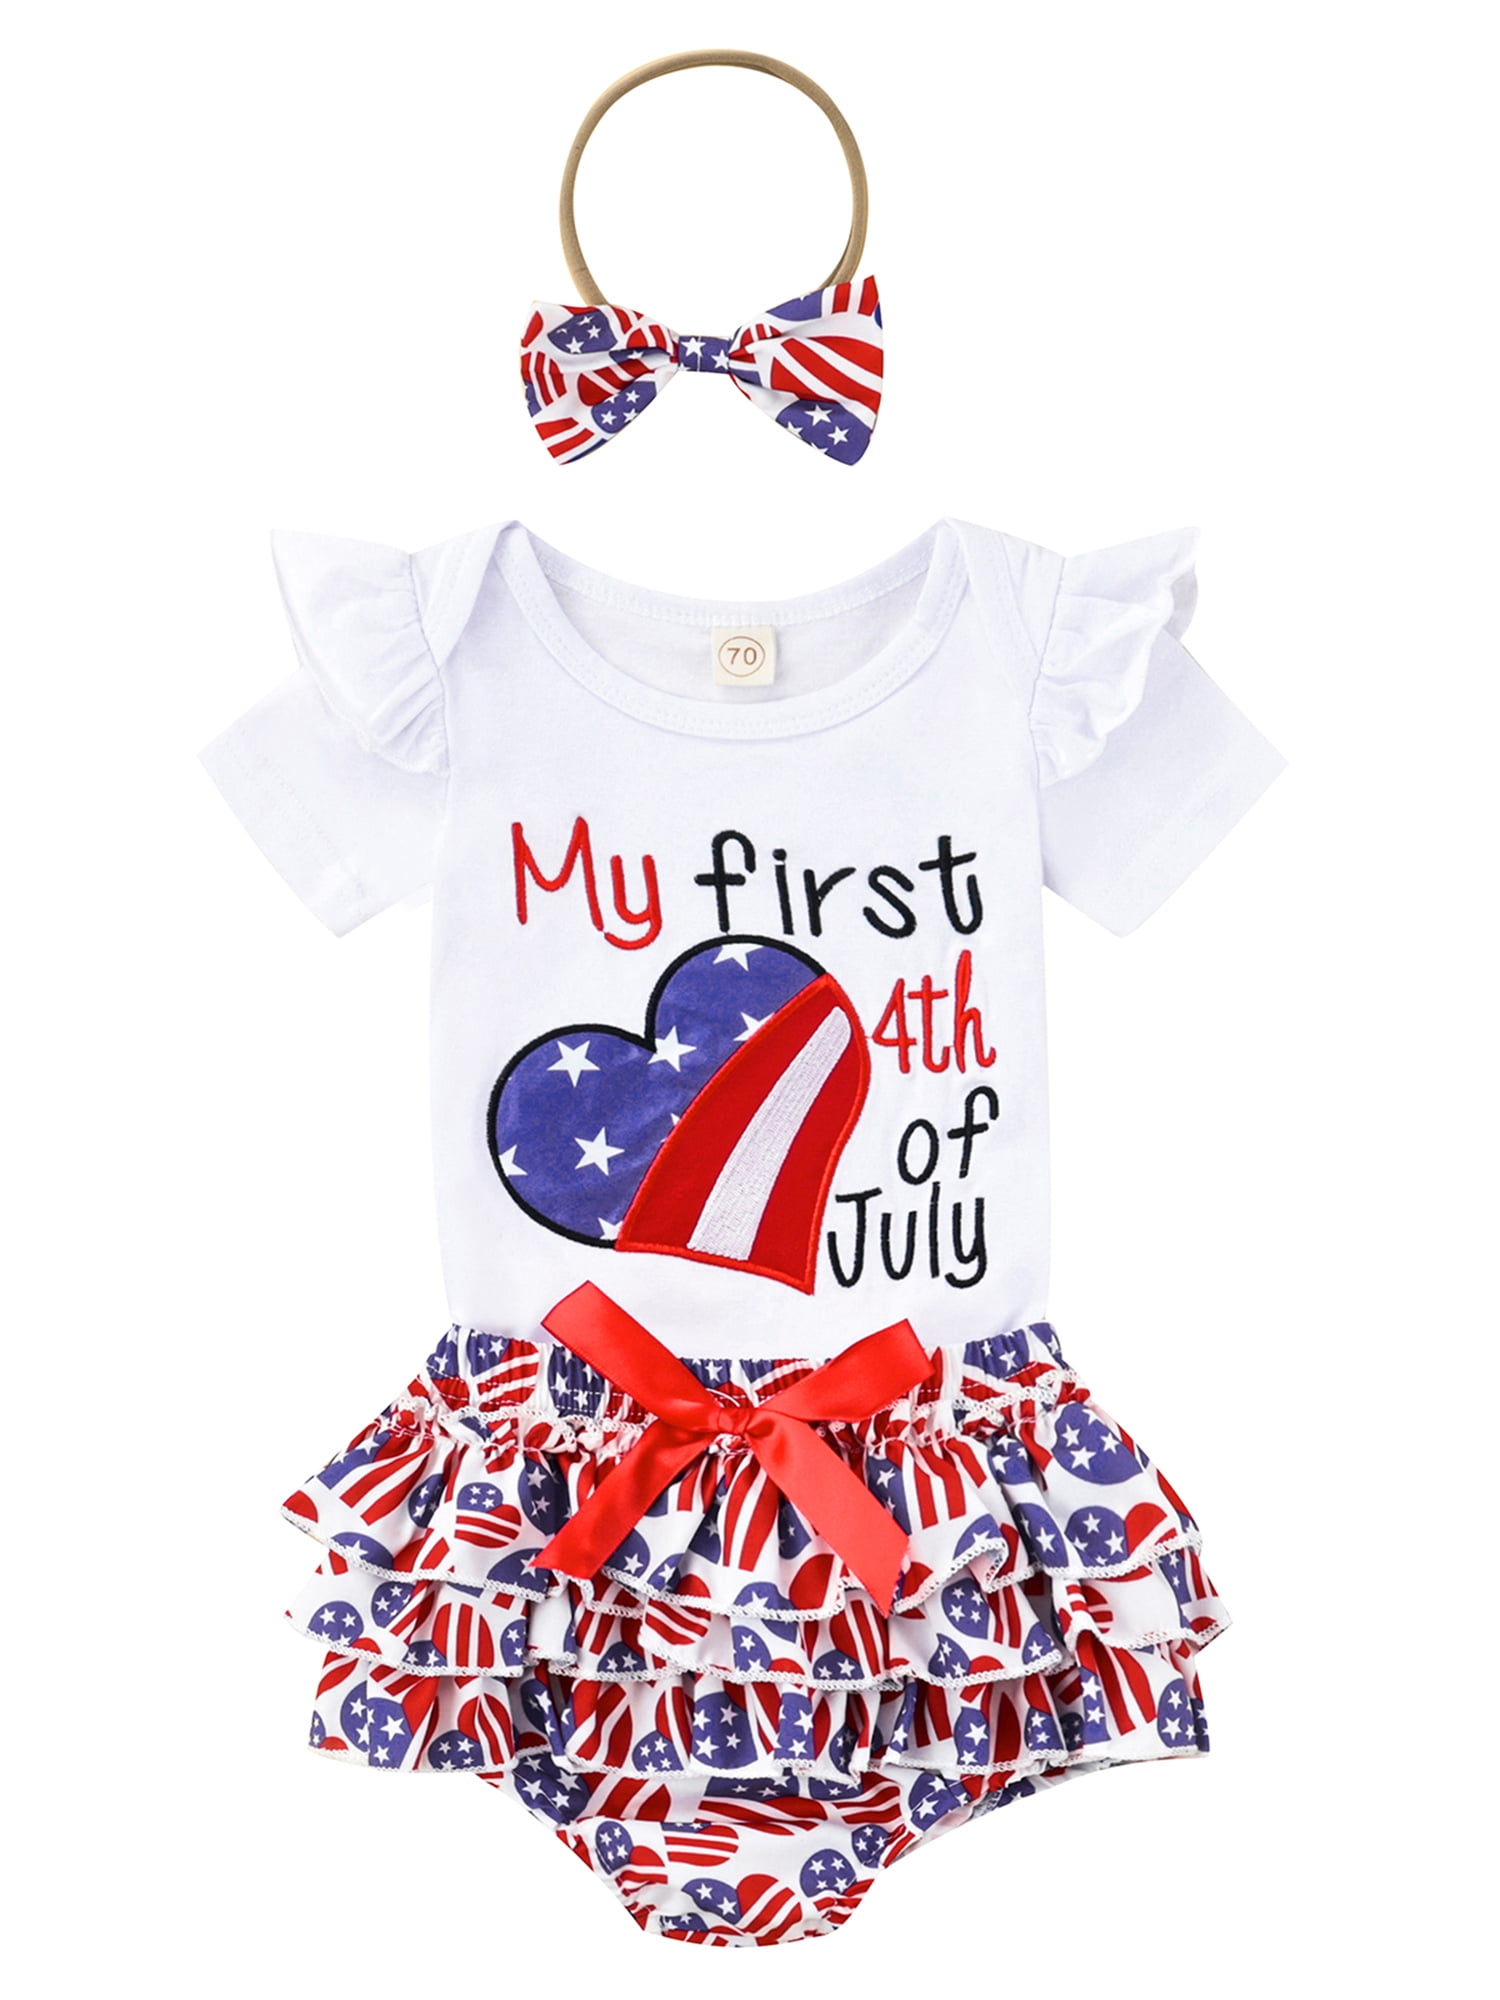 Newborn Baby Girls Clothes Short Sleeve Embroidered Rompers Playsuit Outfits 